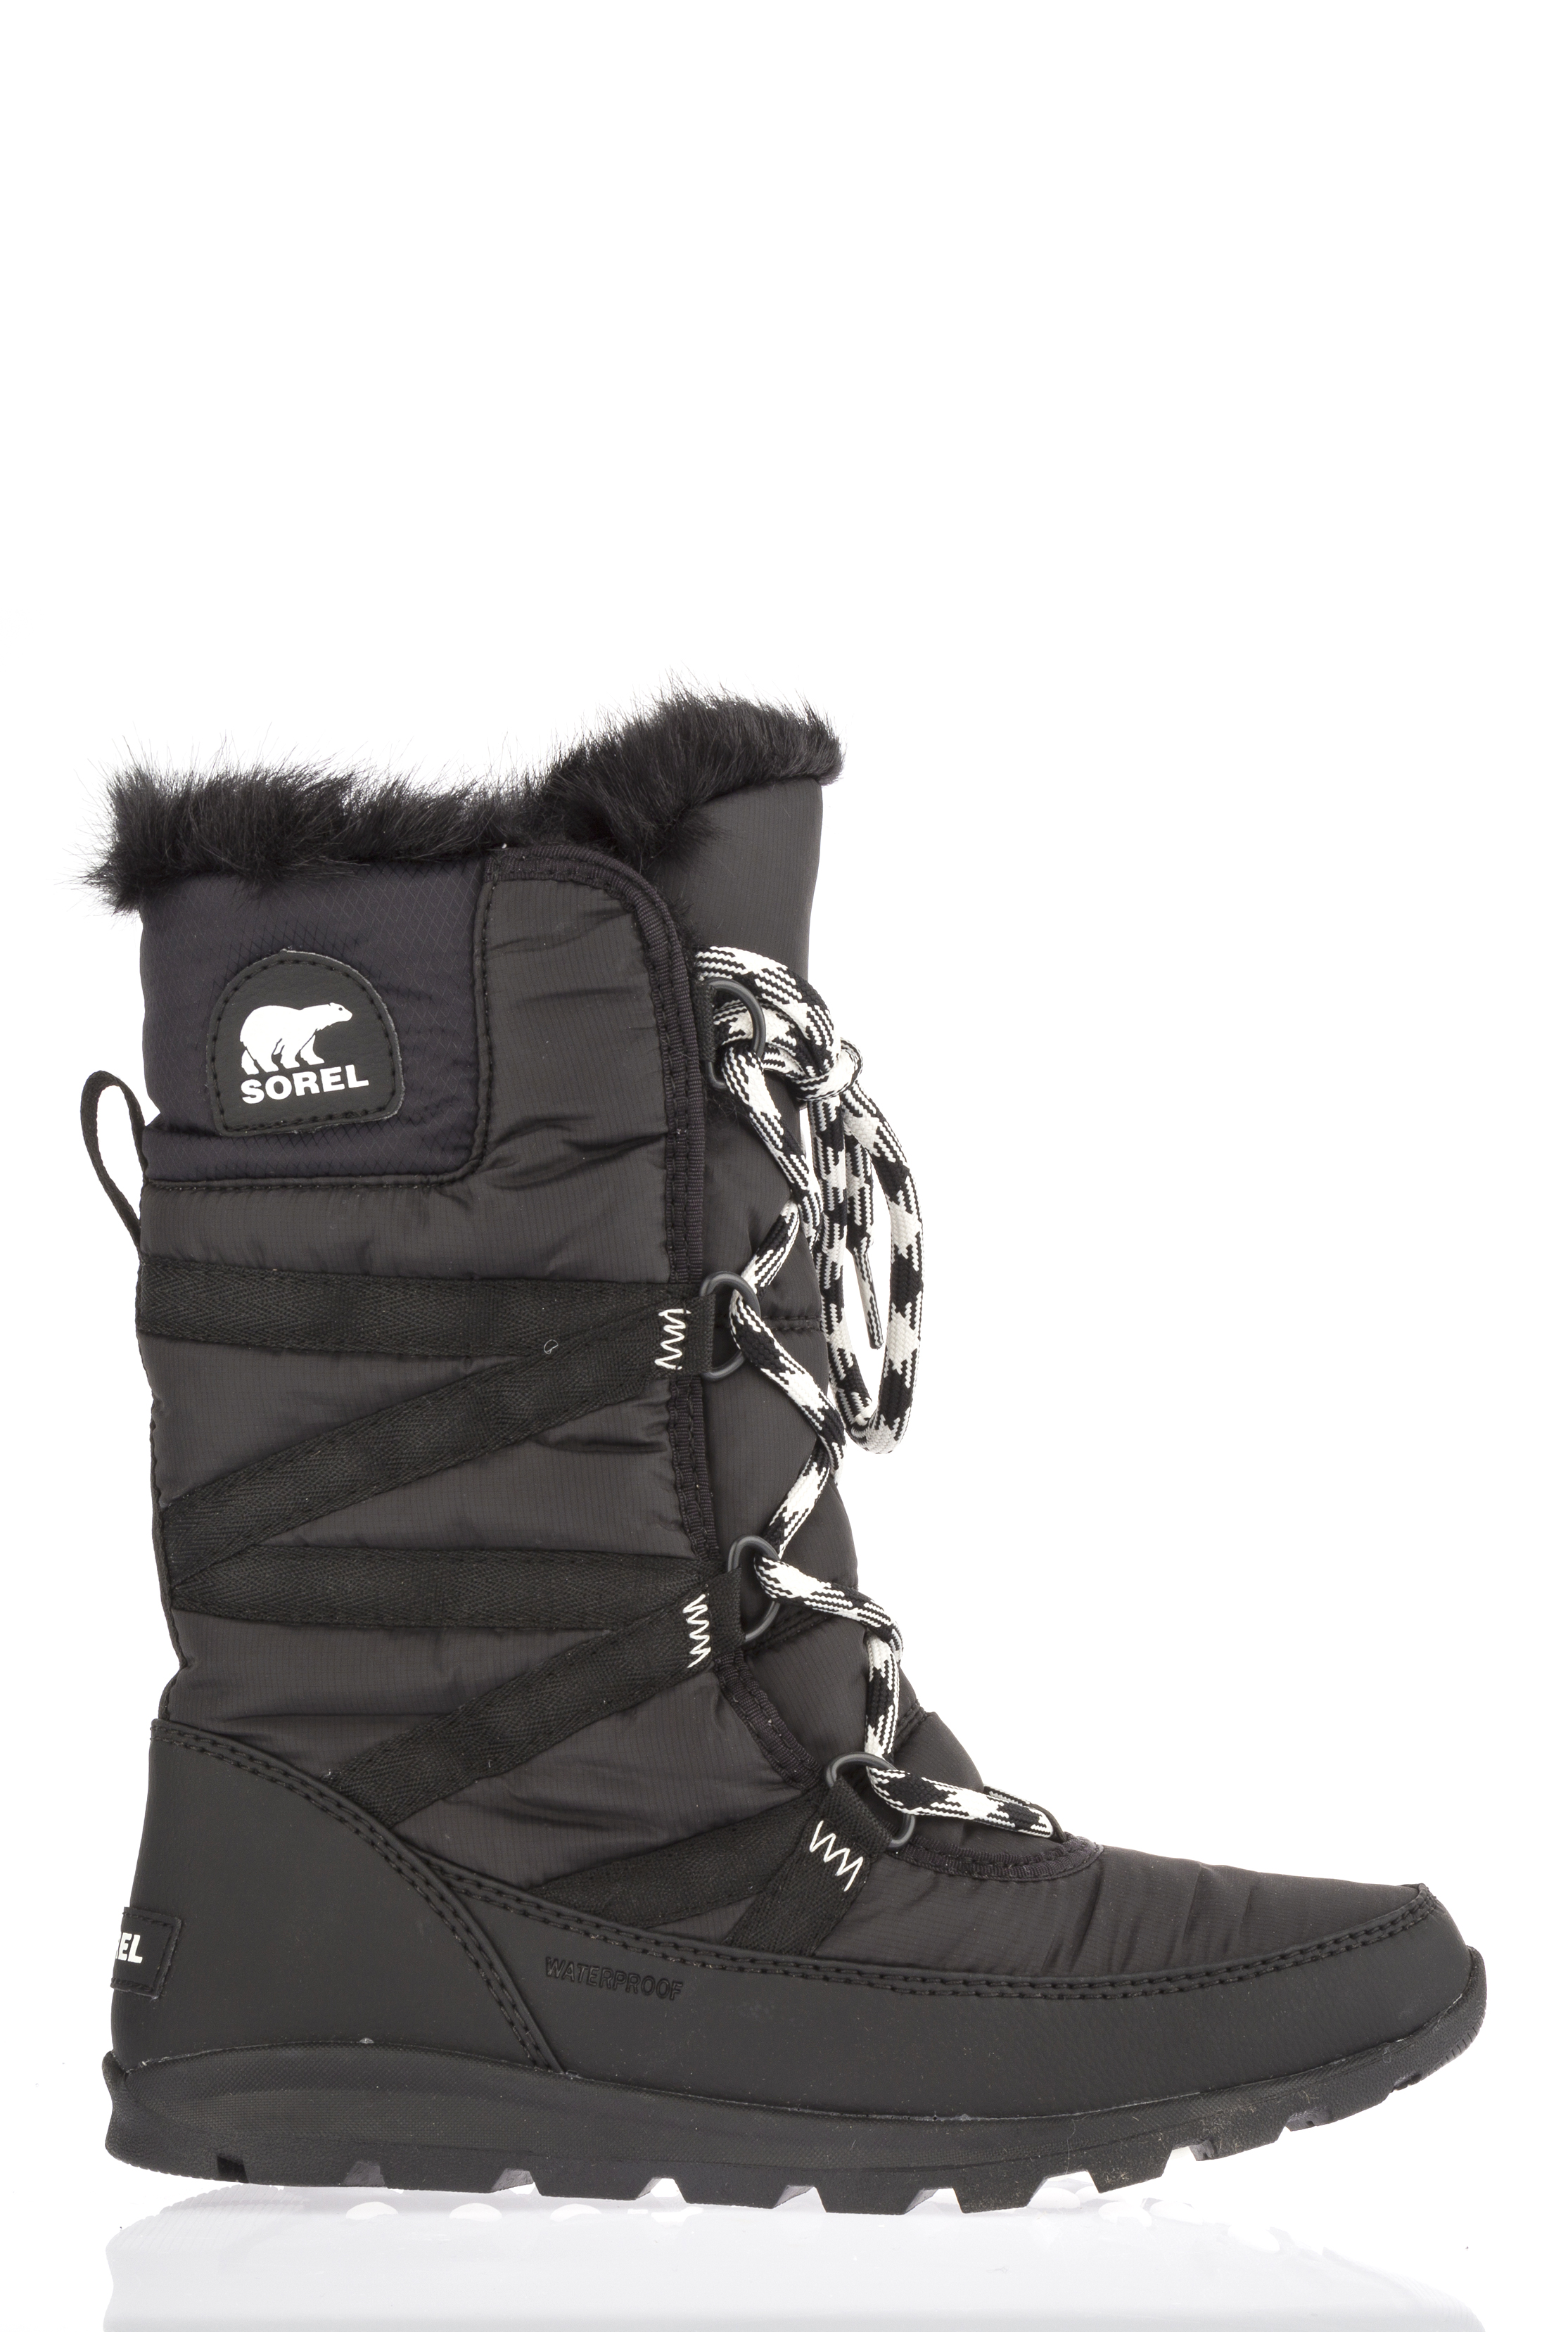 Sorel Whitney Tall Lace Winter Boots 